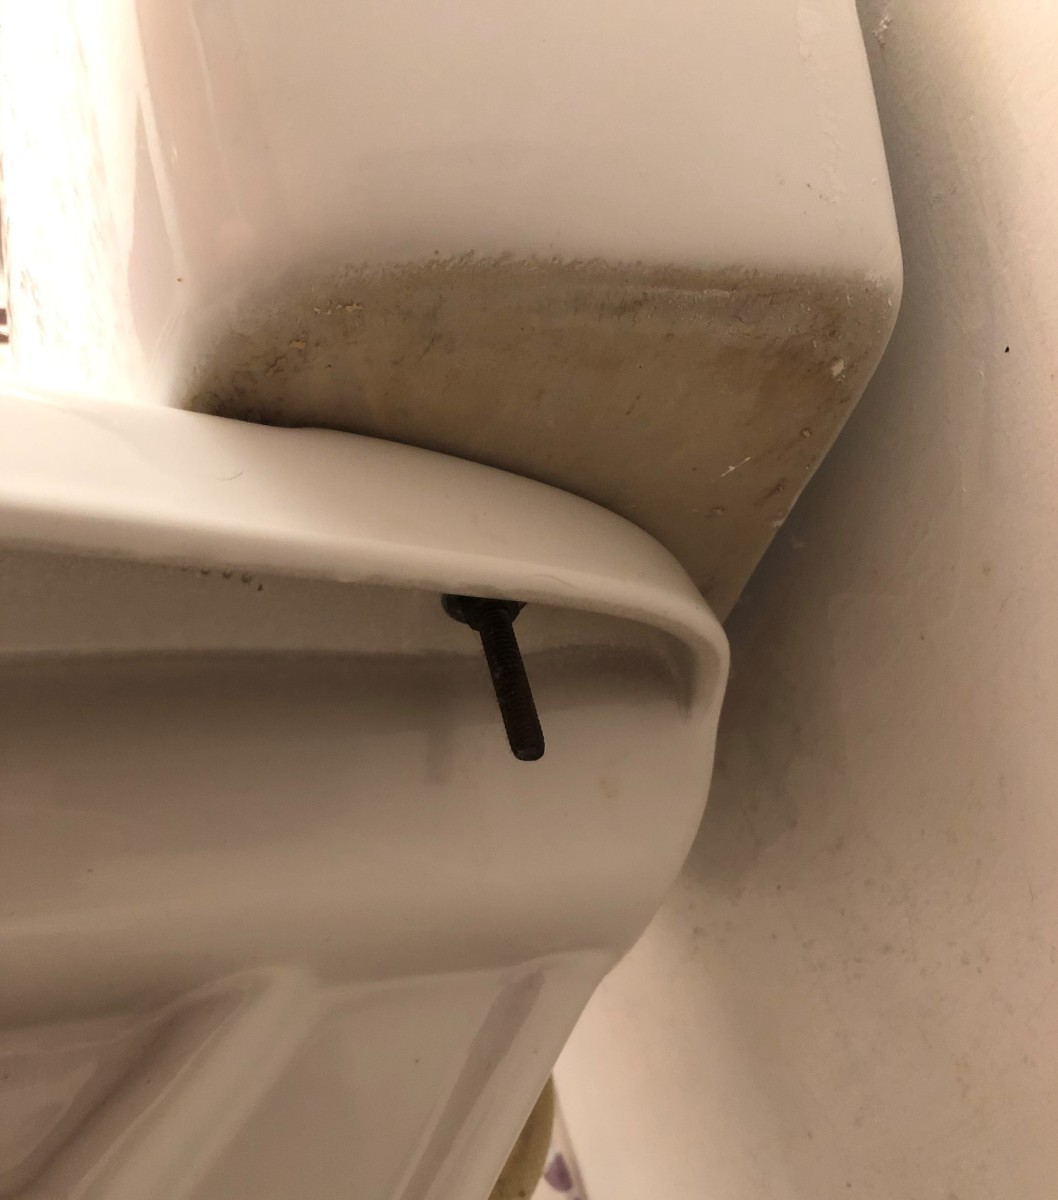 Water leaking between the tank and bowl indicates worn gaskets or seals. Because of the age of the other parts inside, this toilet received a complete rebuild kit, which included new gaskets and seals.